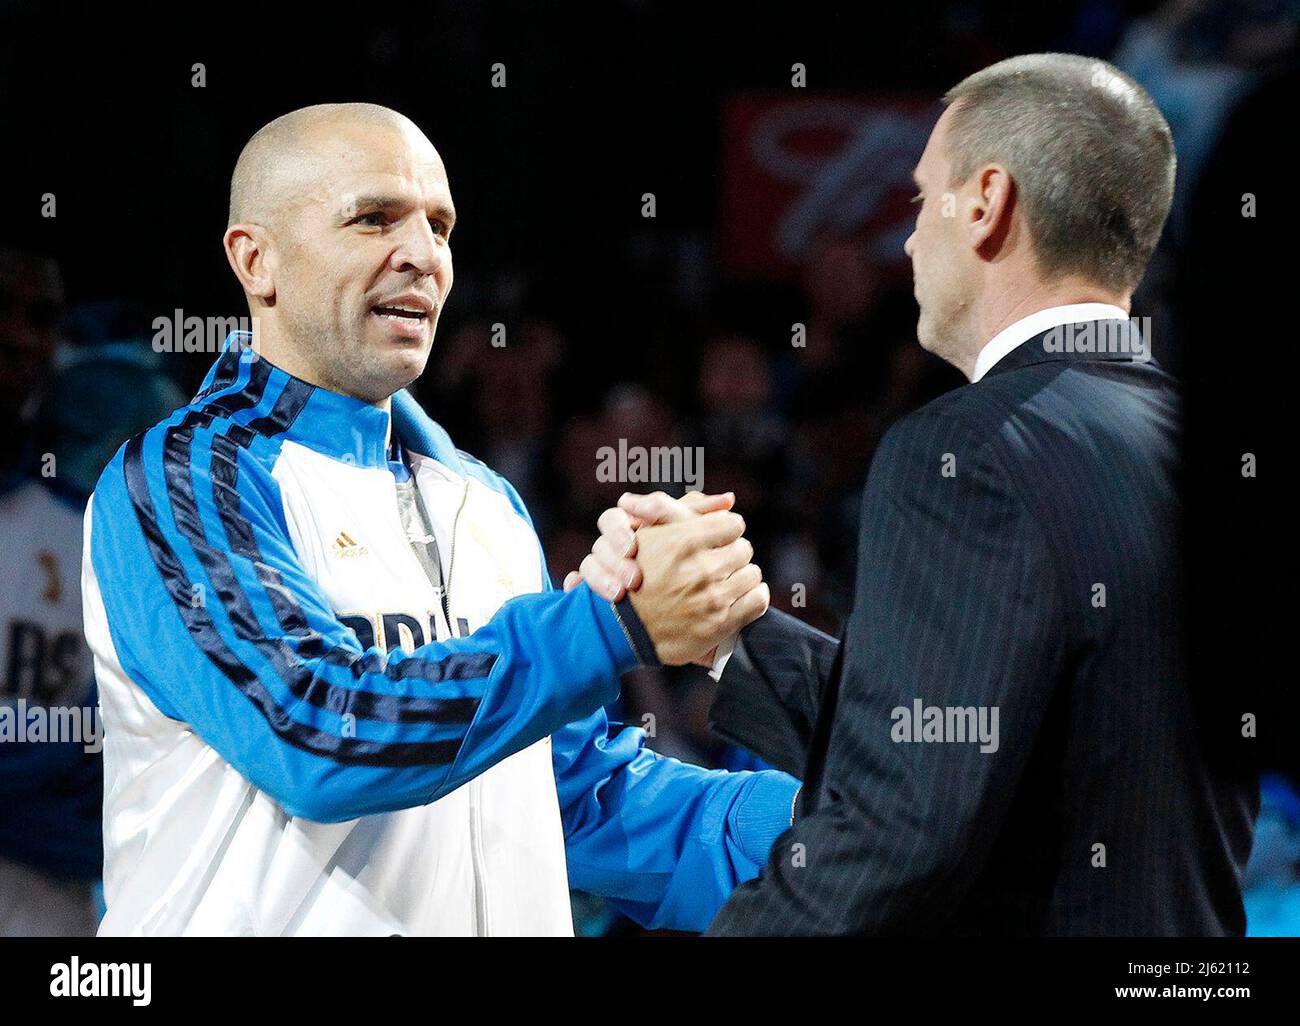 Dallas, USA. 25th Jan, 2012. The Dallas Mavericks' Jason Kidd is greeted by coach Rick Carlisle, right, while receiving his championship ring before the team plays host to the Minnesota Timberwolves at the American Airlines Center in Dallas, Texas, on Wednesday, January 25, 2012. (Photo by Ron T. Ennis/Fort Worth Star-Telegram/TNS/Sipa USA) Credit: Sipa USA/Alamy Live News Stock Photo